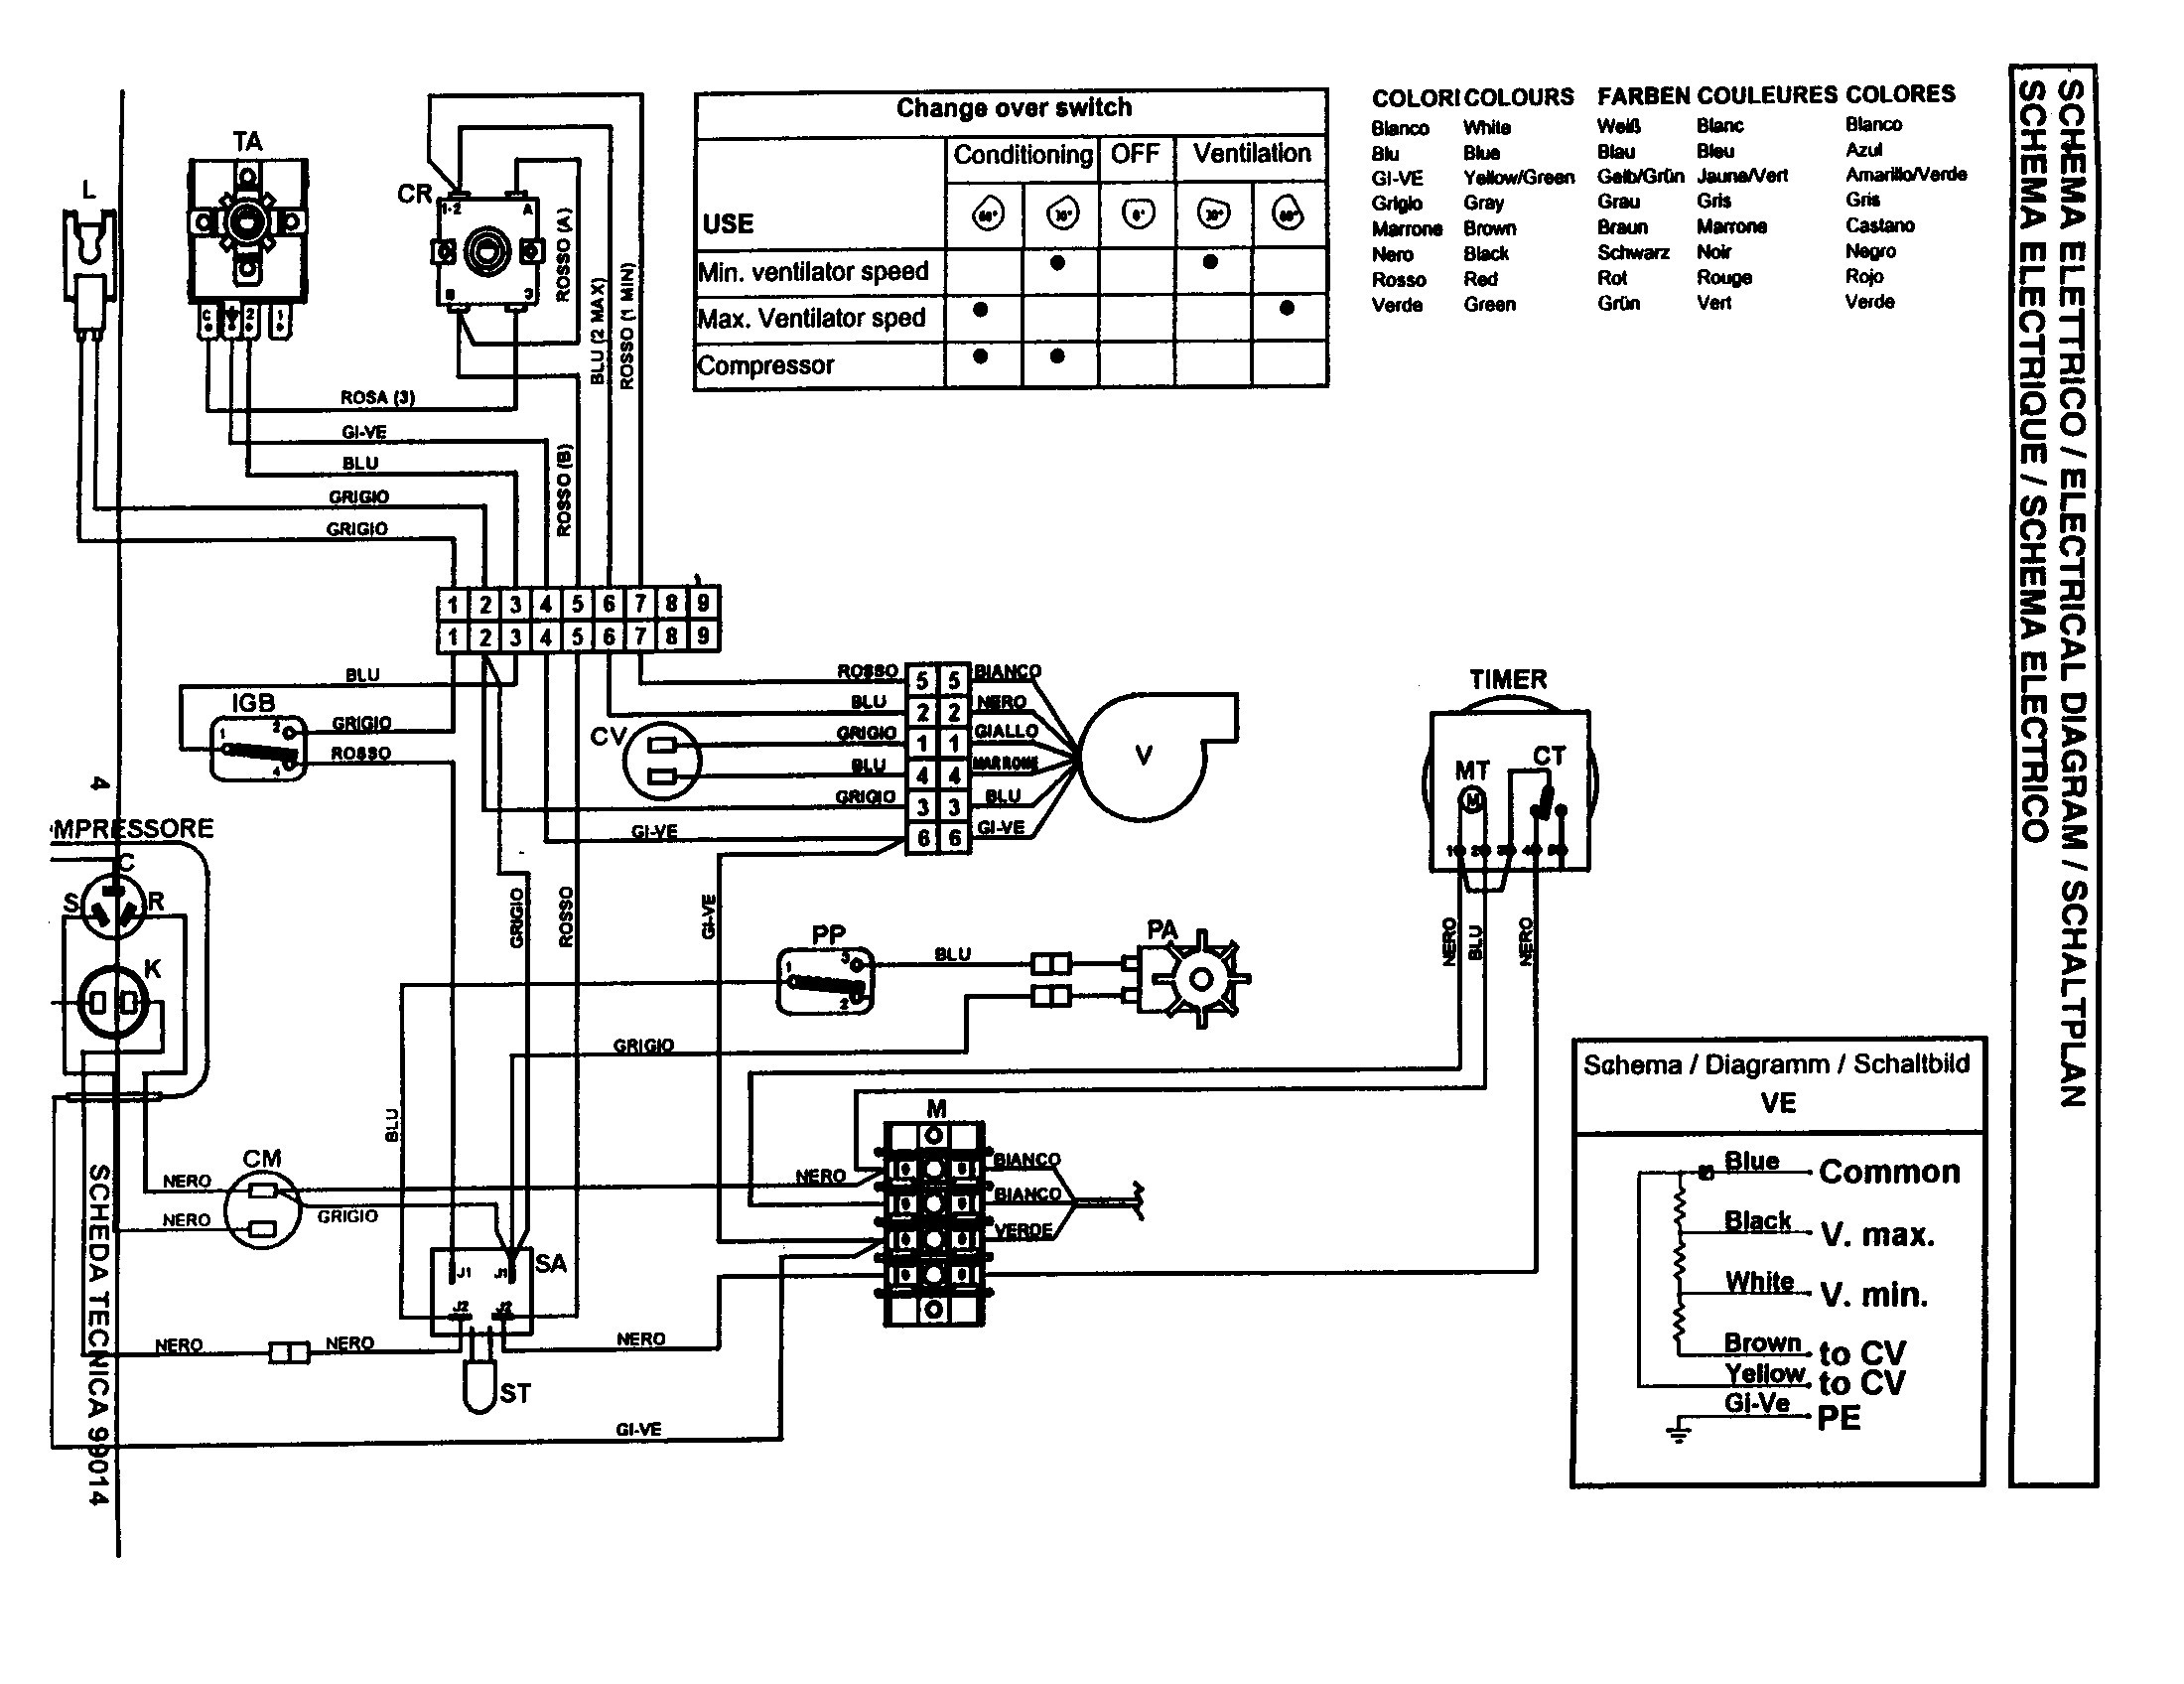 Wiring Diagram Simple Hvac Central Air Conditioner Throughout